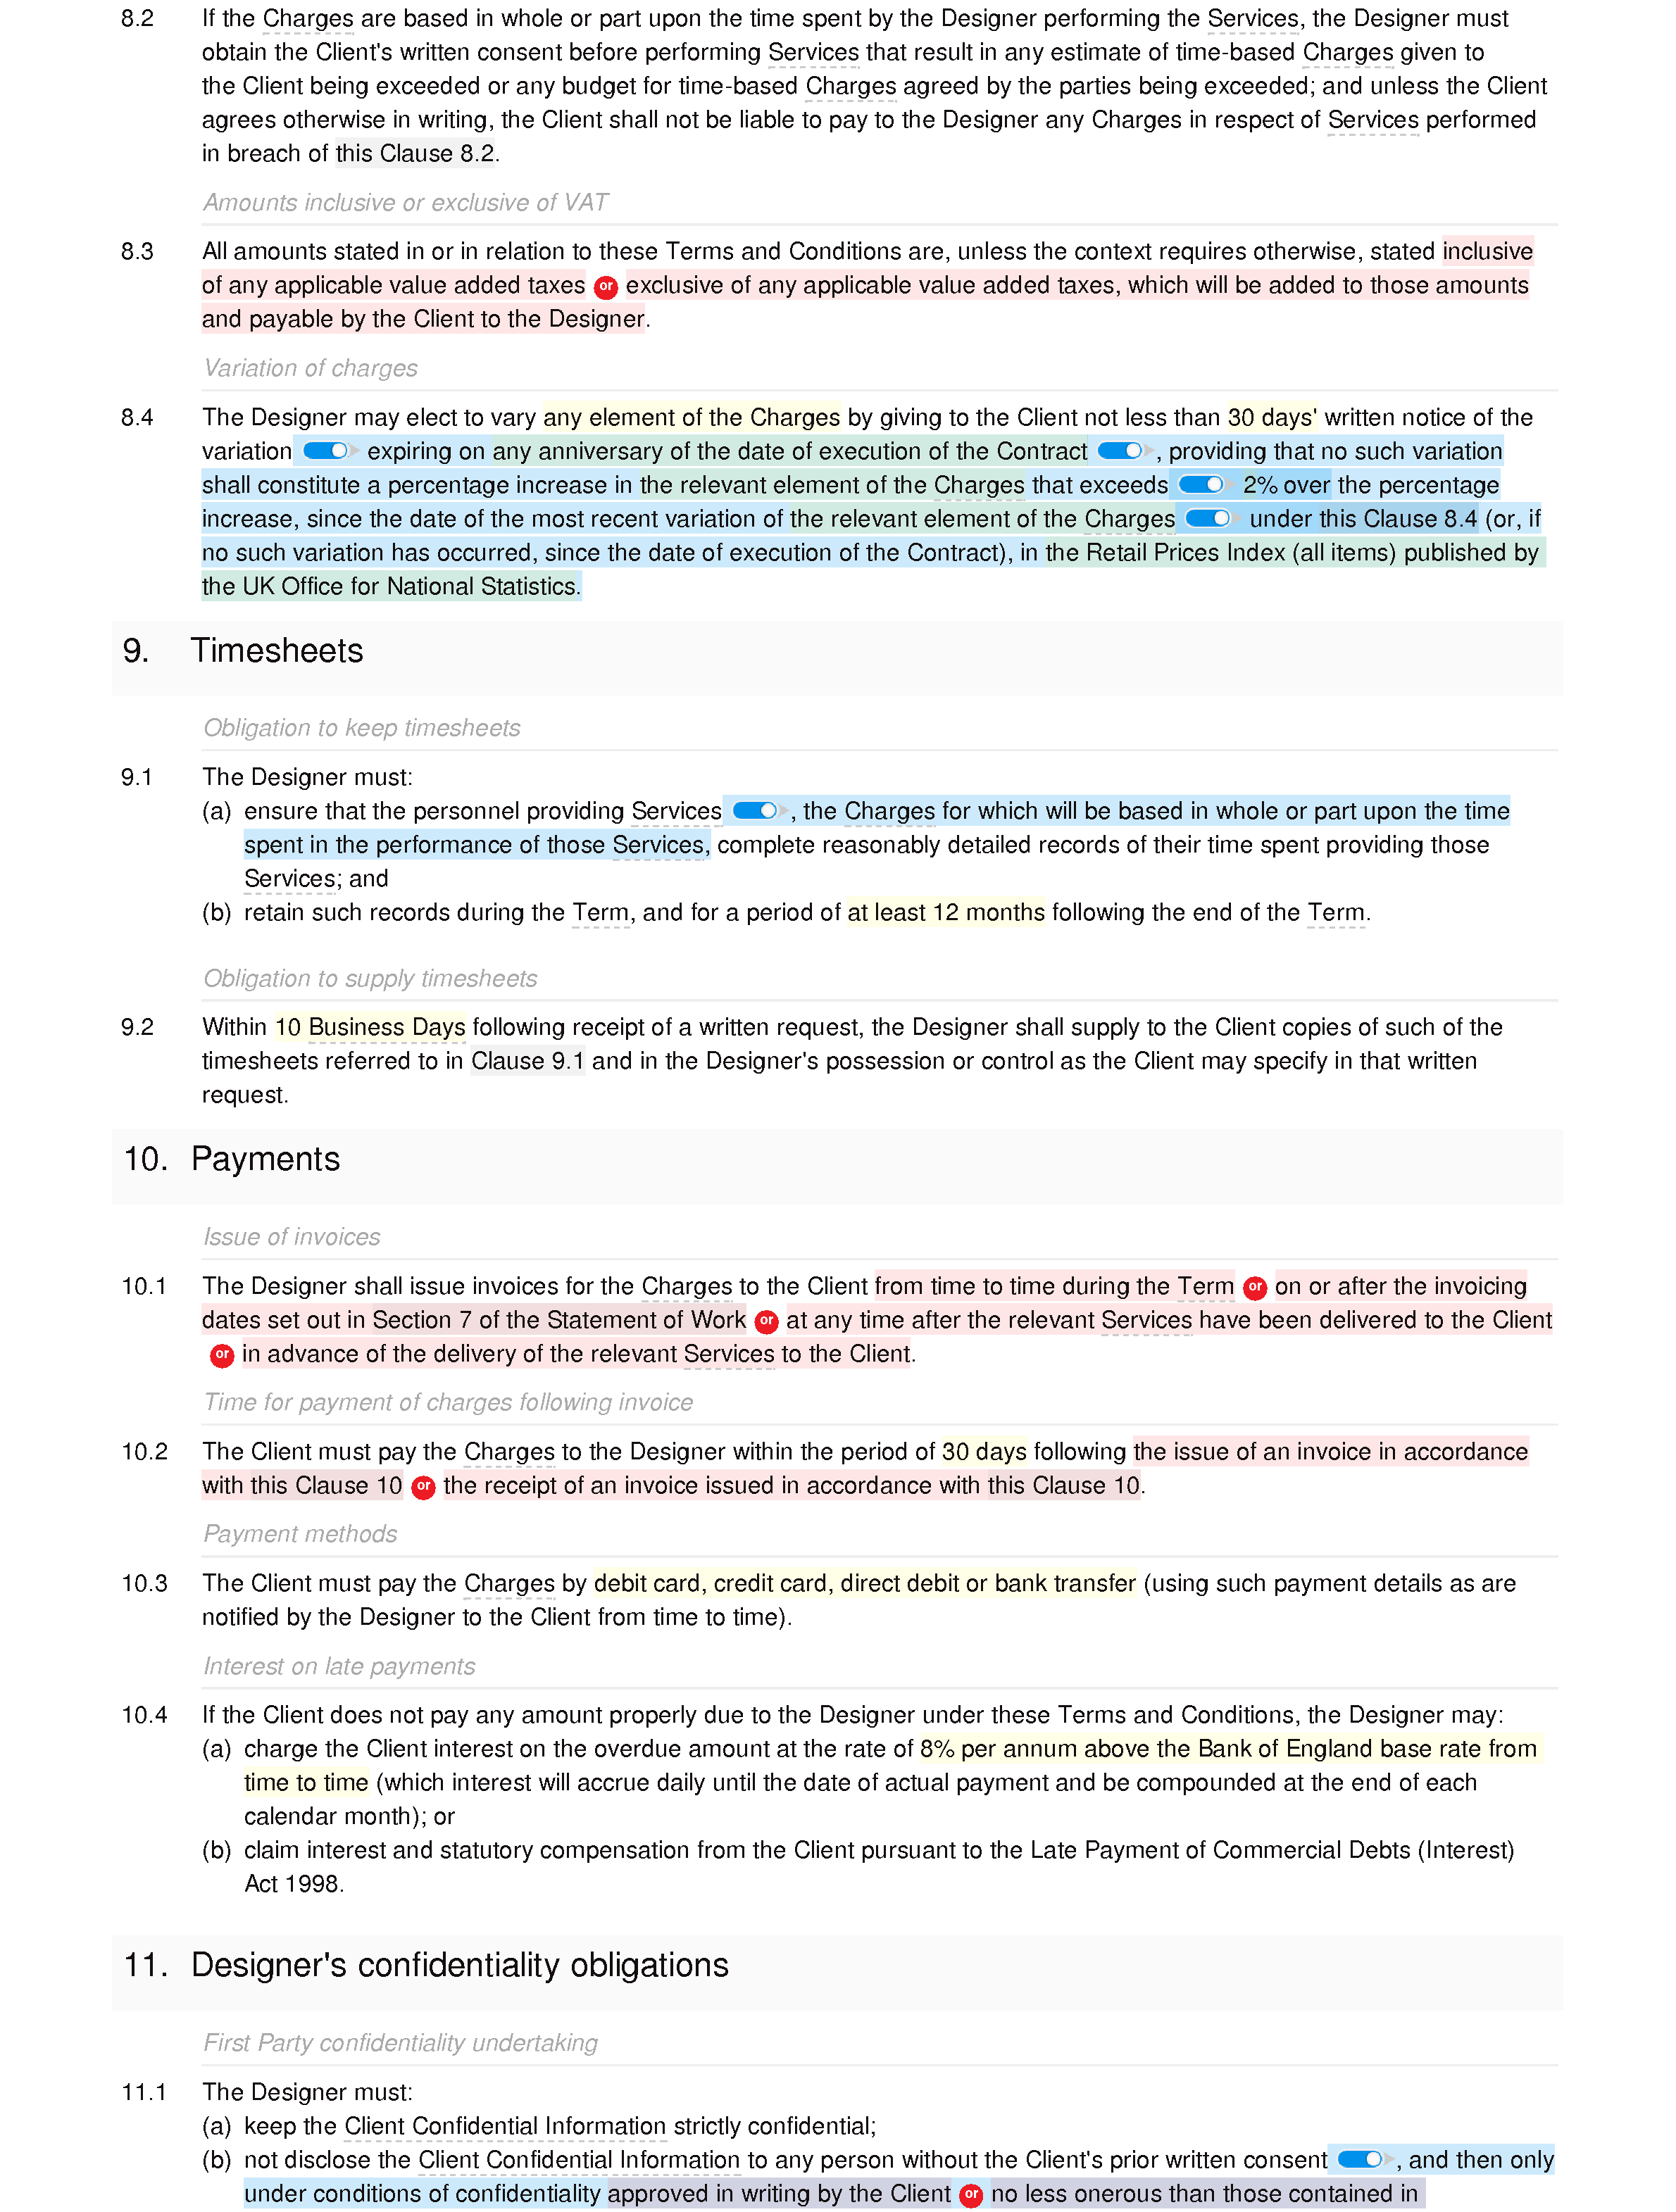 Graphic design terms and conditions document editor preview